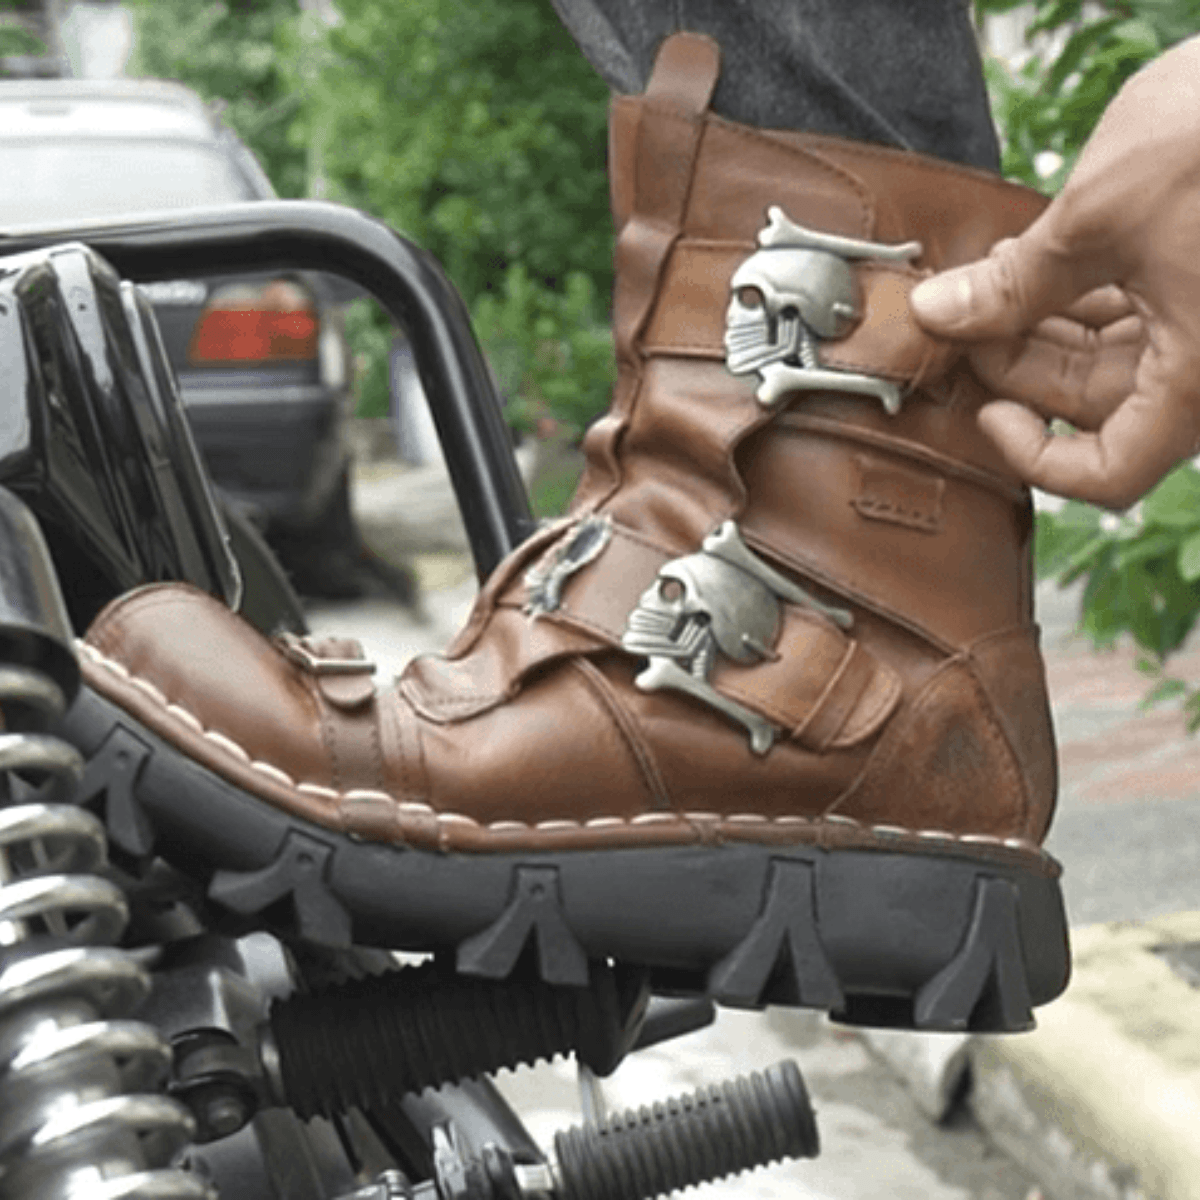 A person is donning Handmade Skull Leather Boots + Free Leg Bag Bundle while riding a motorcycle.